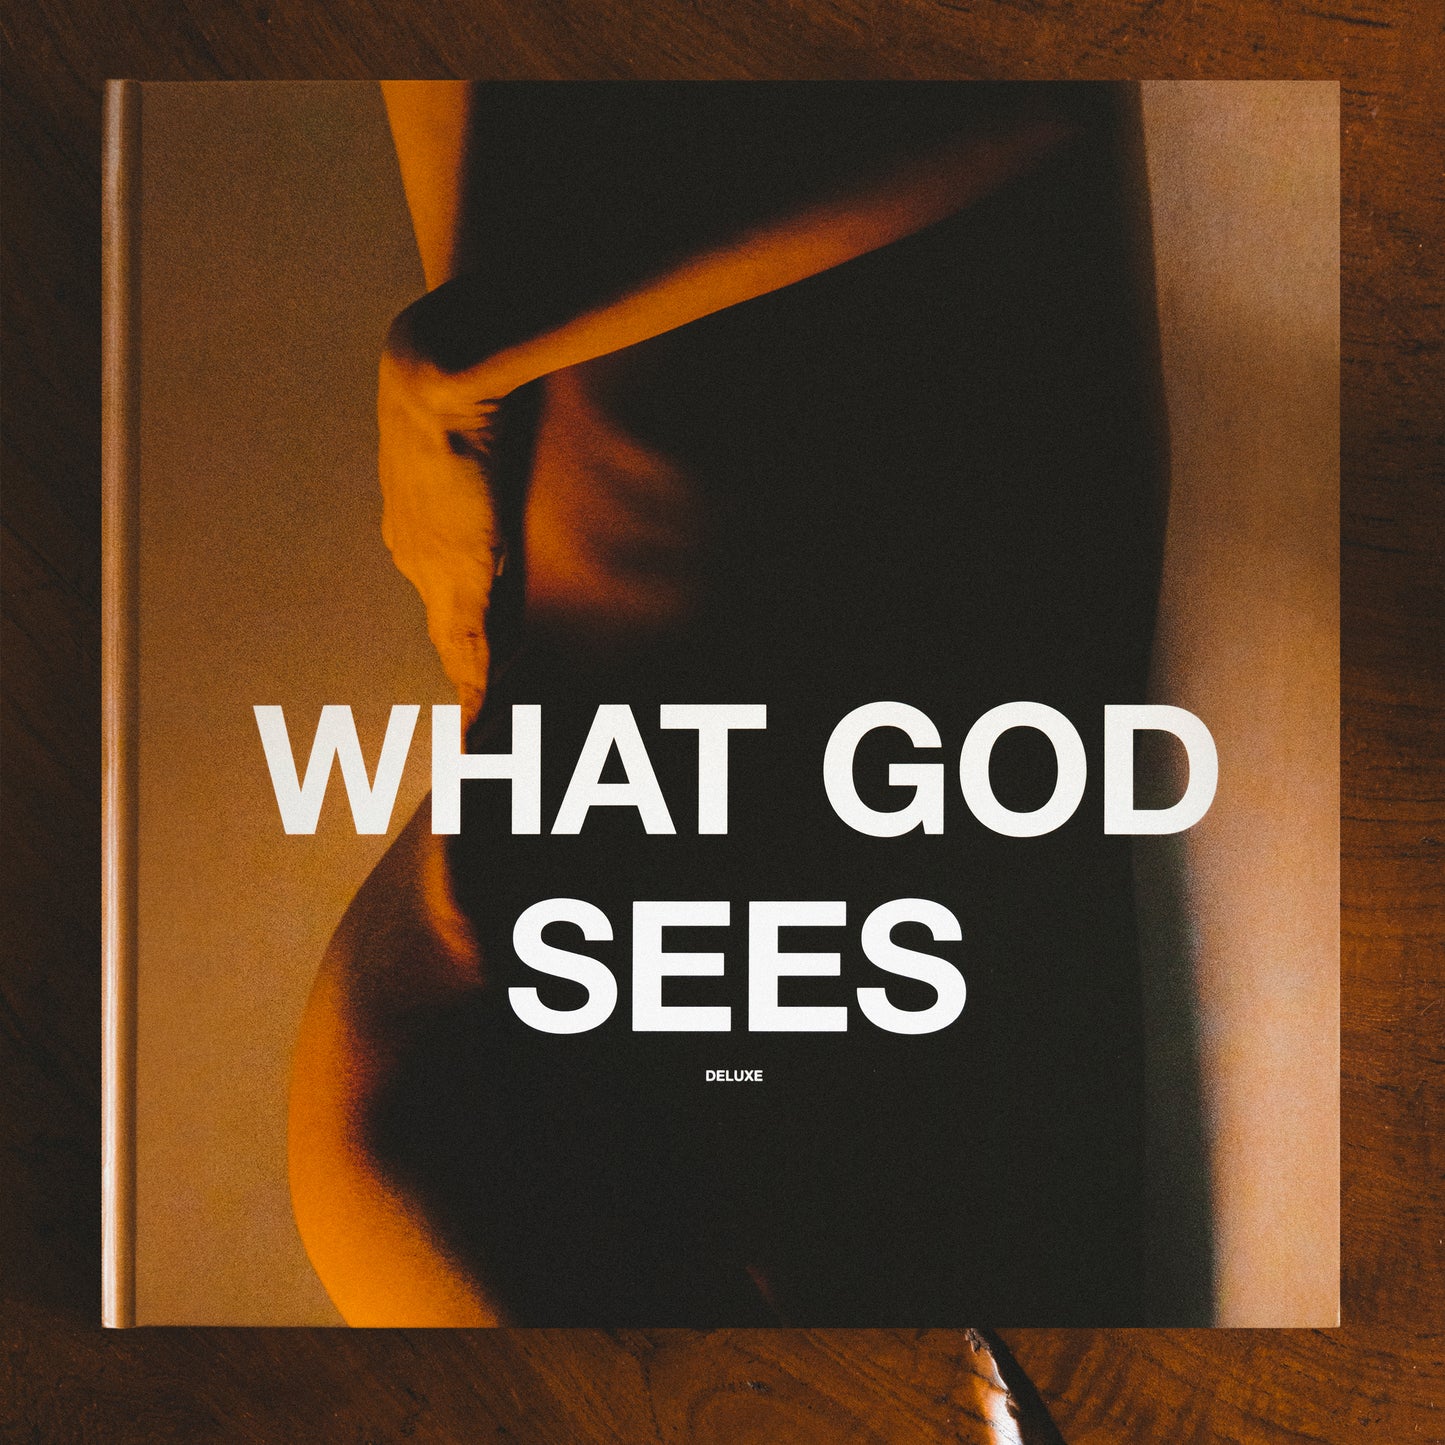 "WHAT GOD SEES DELUXE"